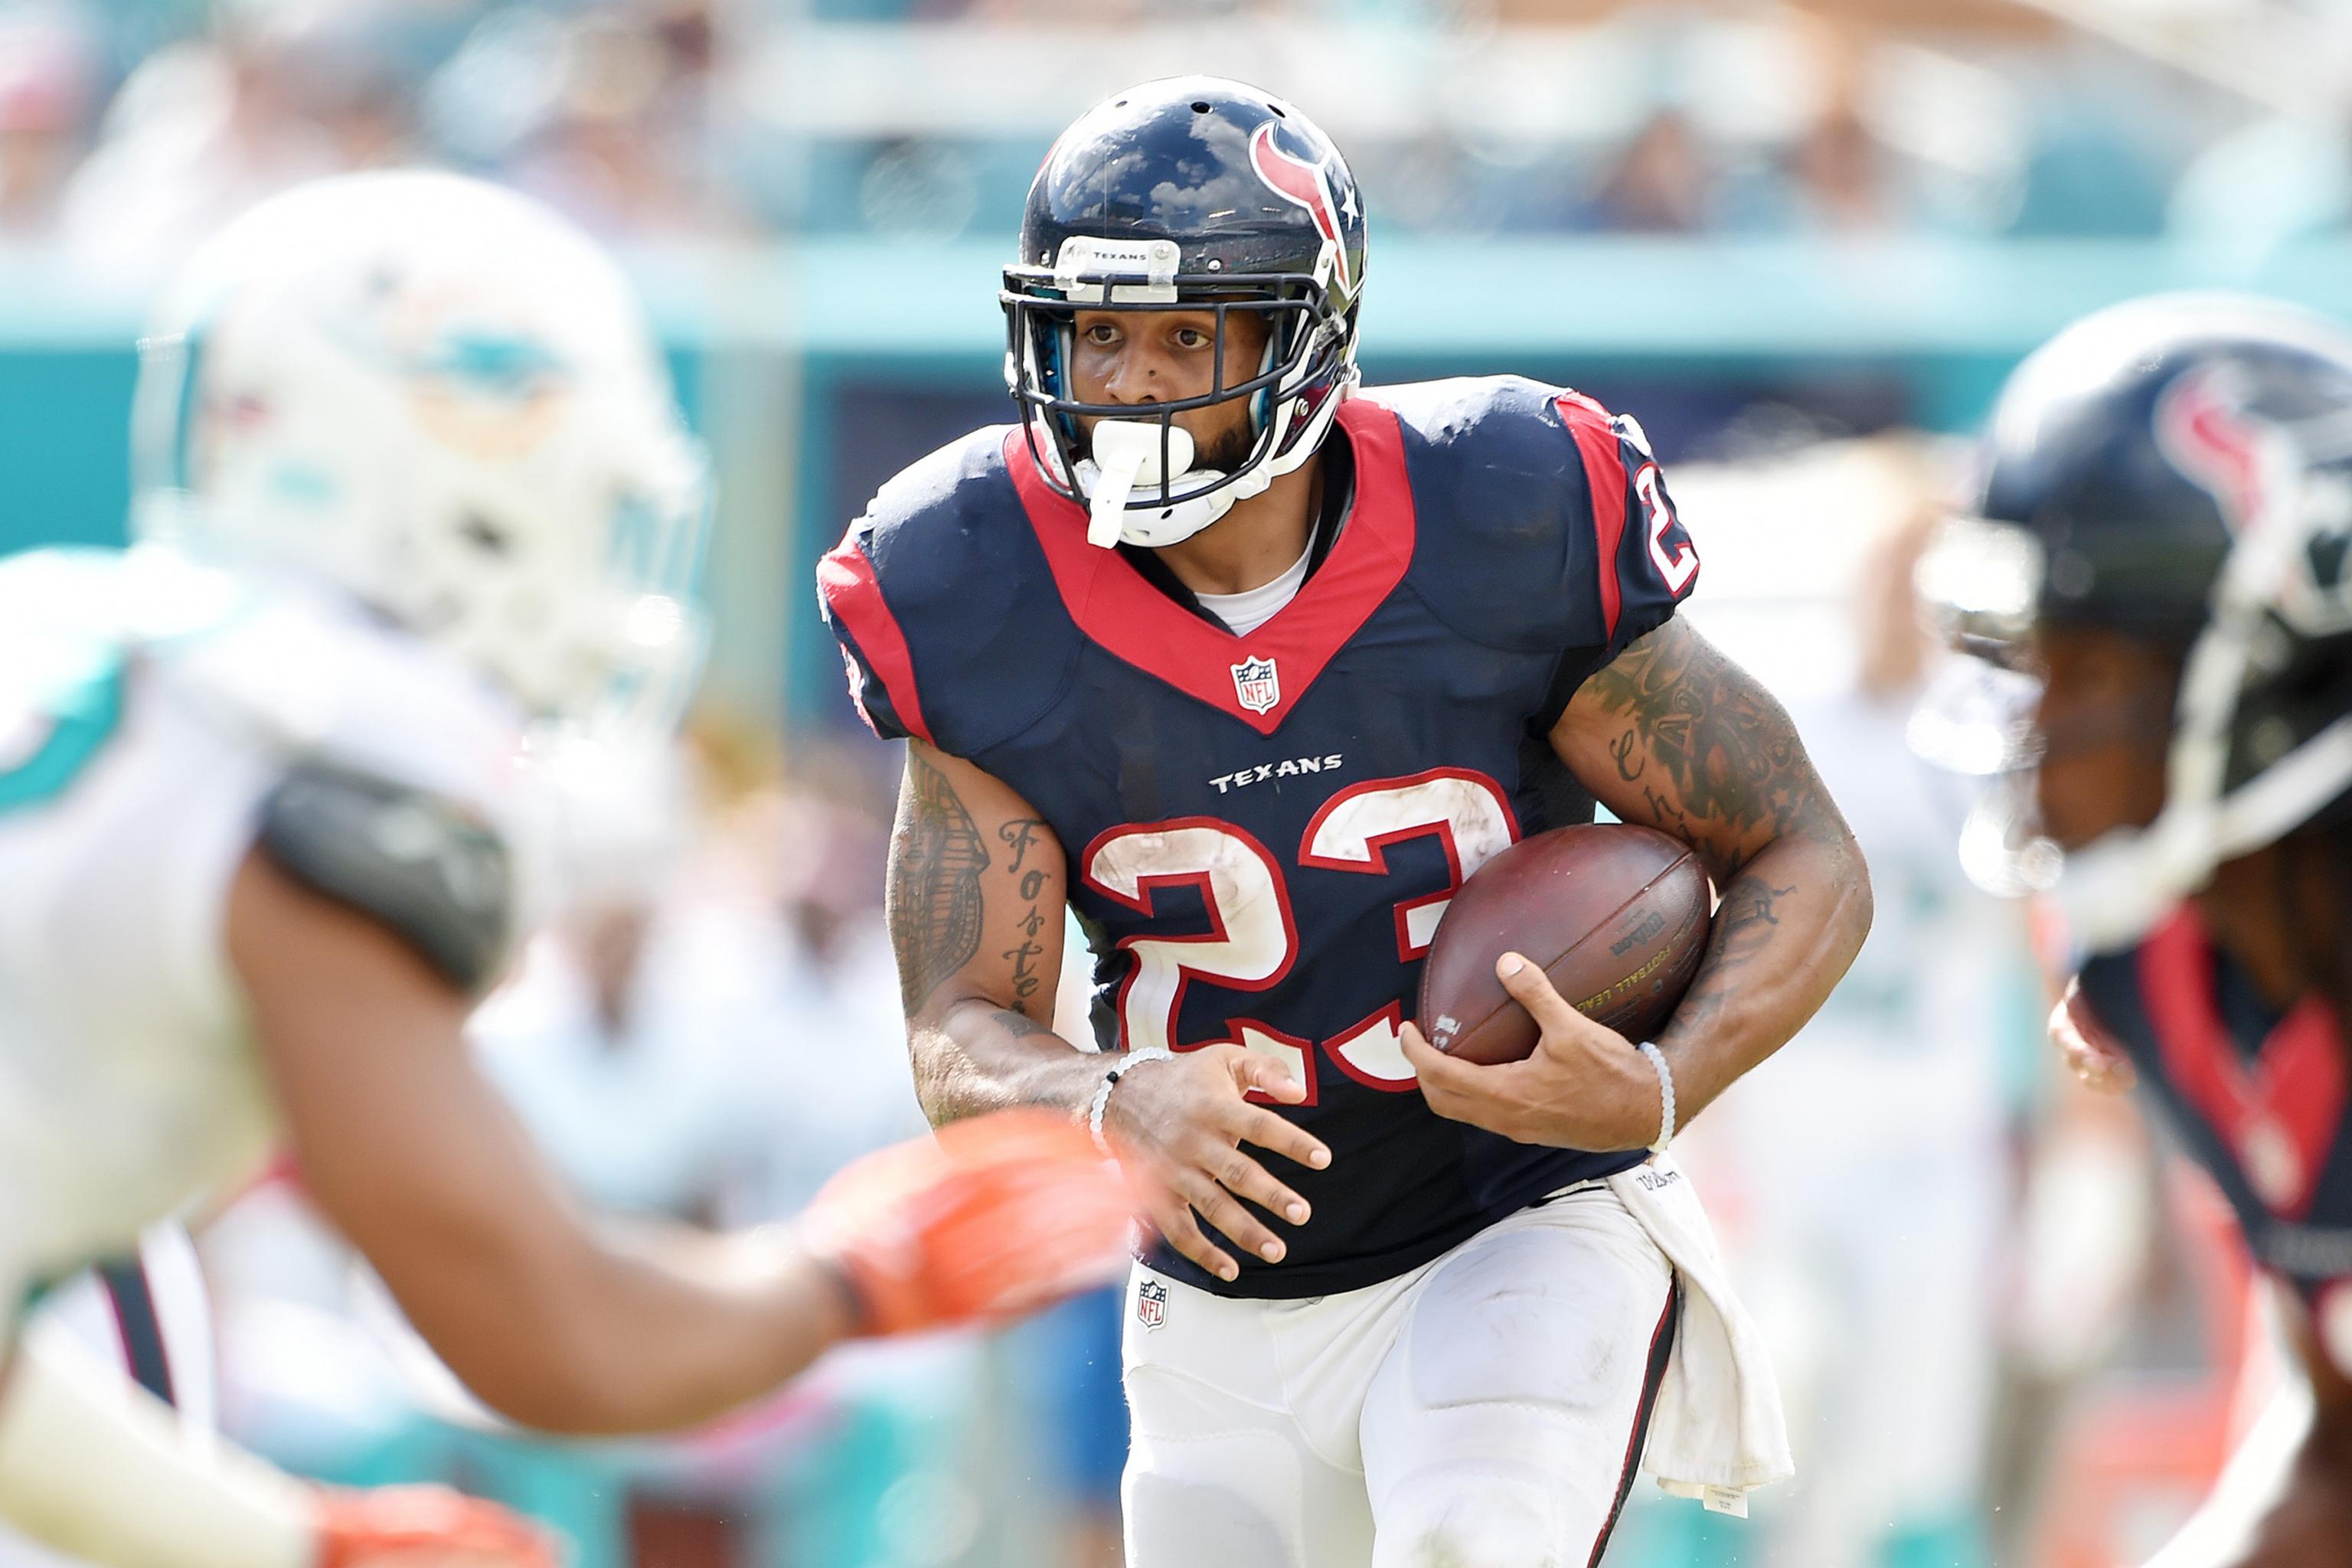 HOUSTON TEXANS: Arian Foster to hold youth football camp